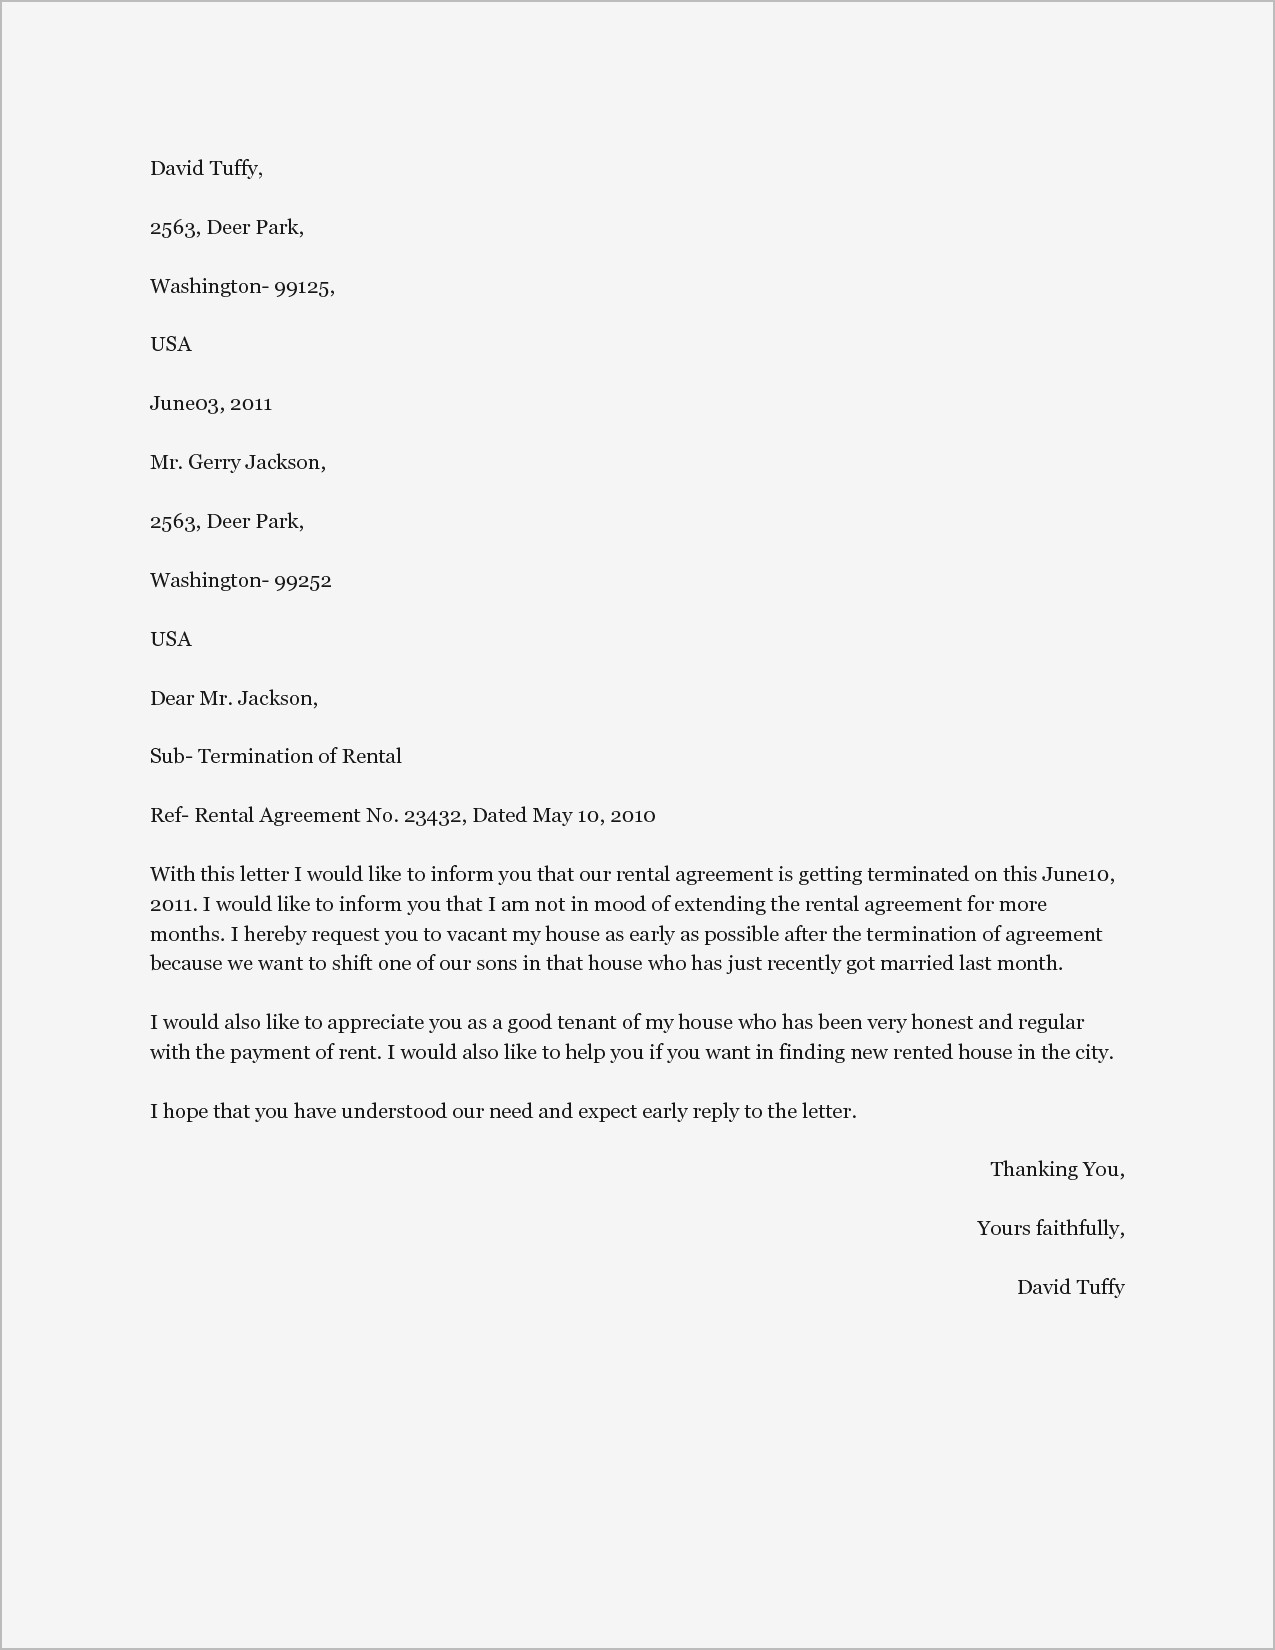 Early Lease Termination Letter to Landlord Template - Termination Lease Agreement Sample Letter Ideas